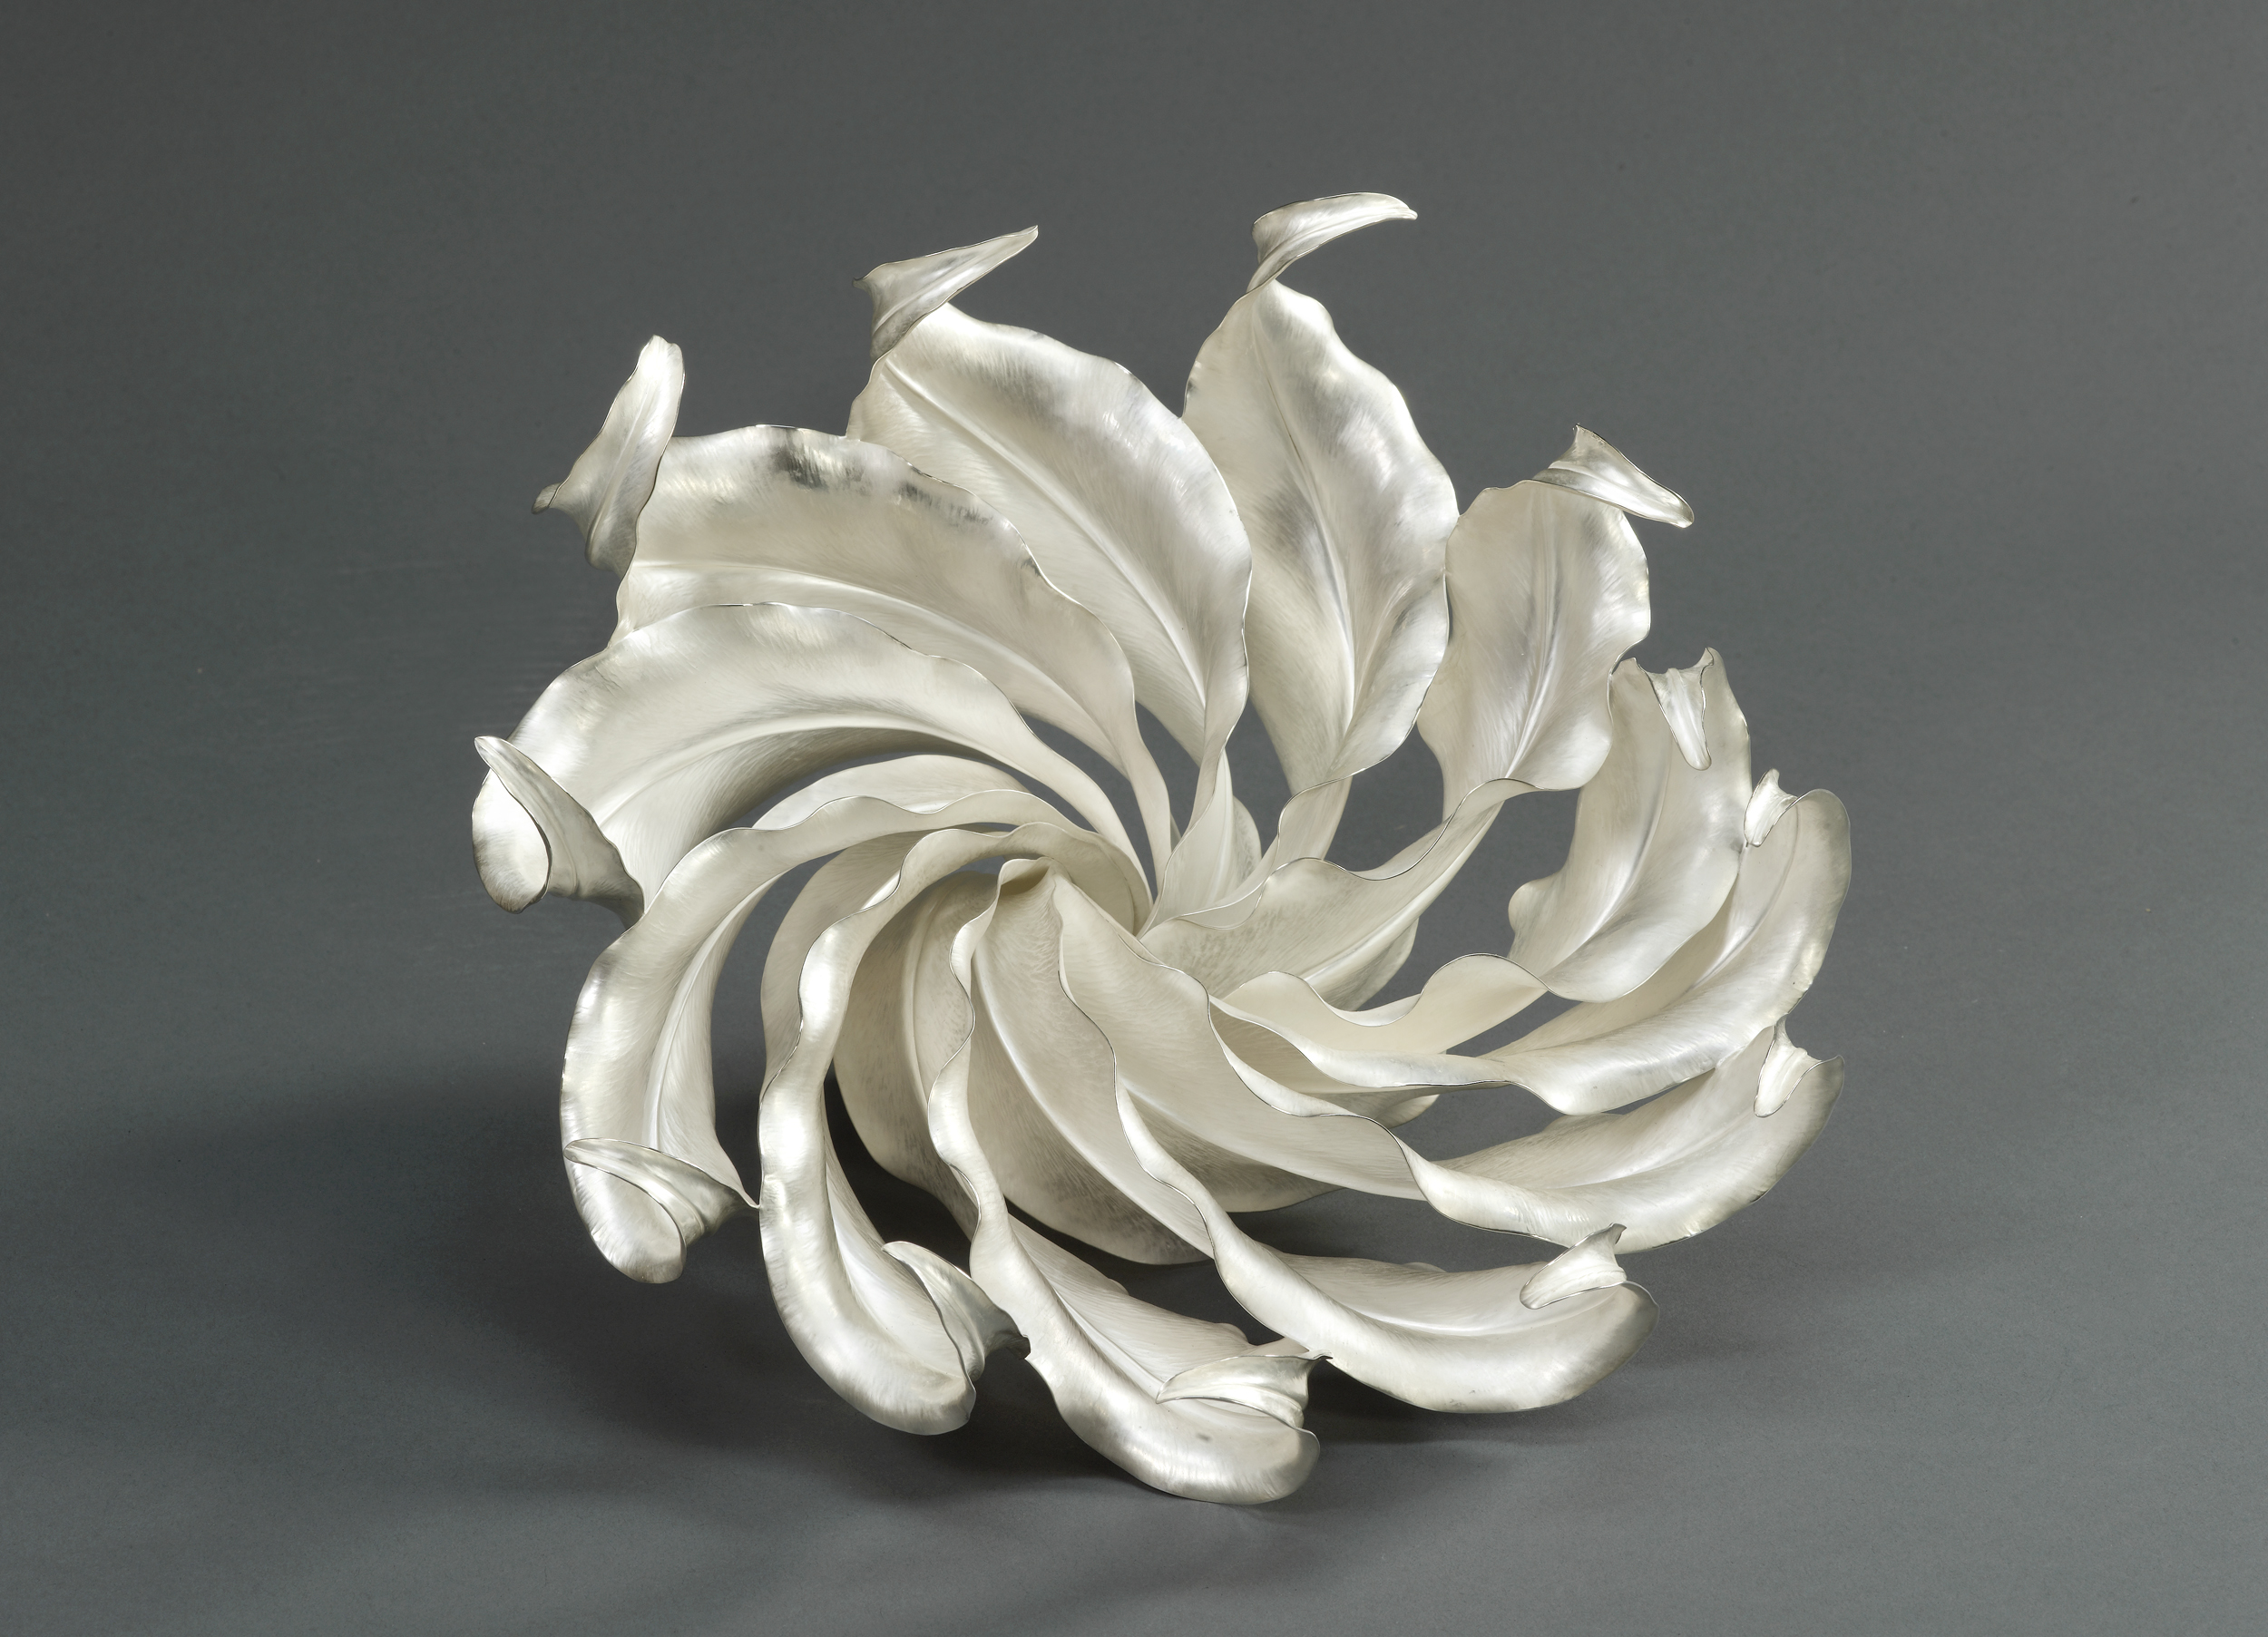 ‘Spiritus’ centrepiece, 2010, Theresa Nguyen. Measurements: Height 19.5cm Width 26.5cm Diameter 24cm. Image © The Goldsmiths Company. Courtesy ‘Collection: The Worshipful Company of Goldsmiths’. '